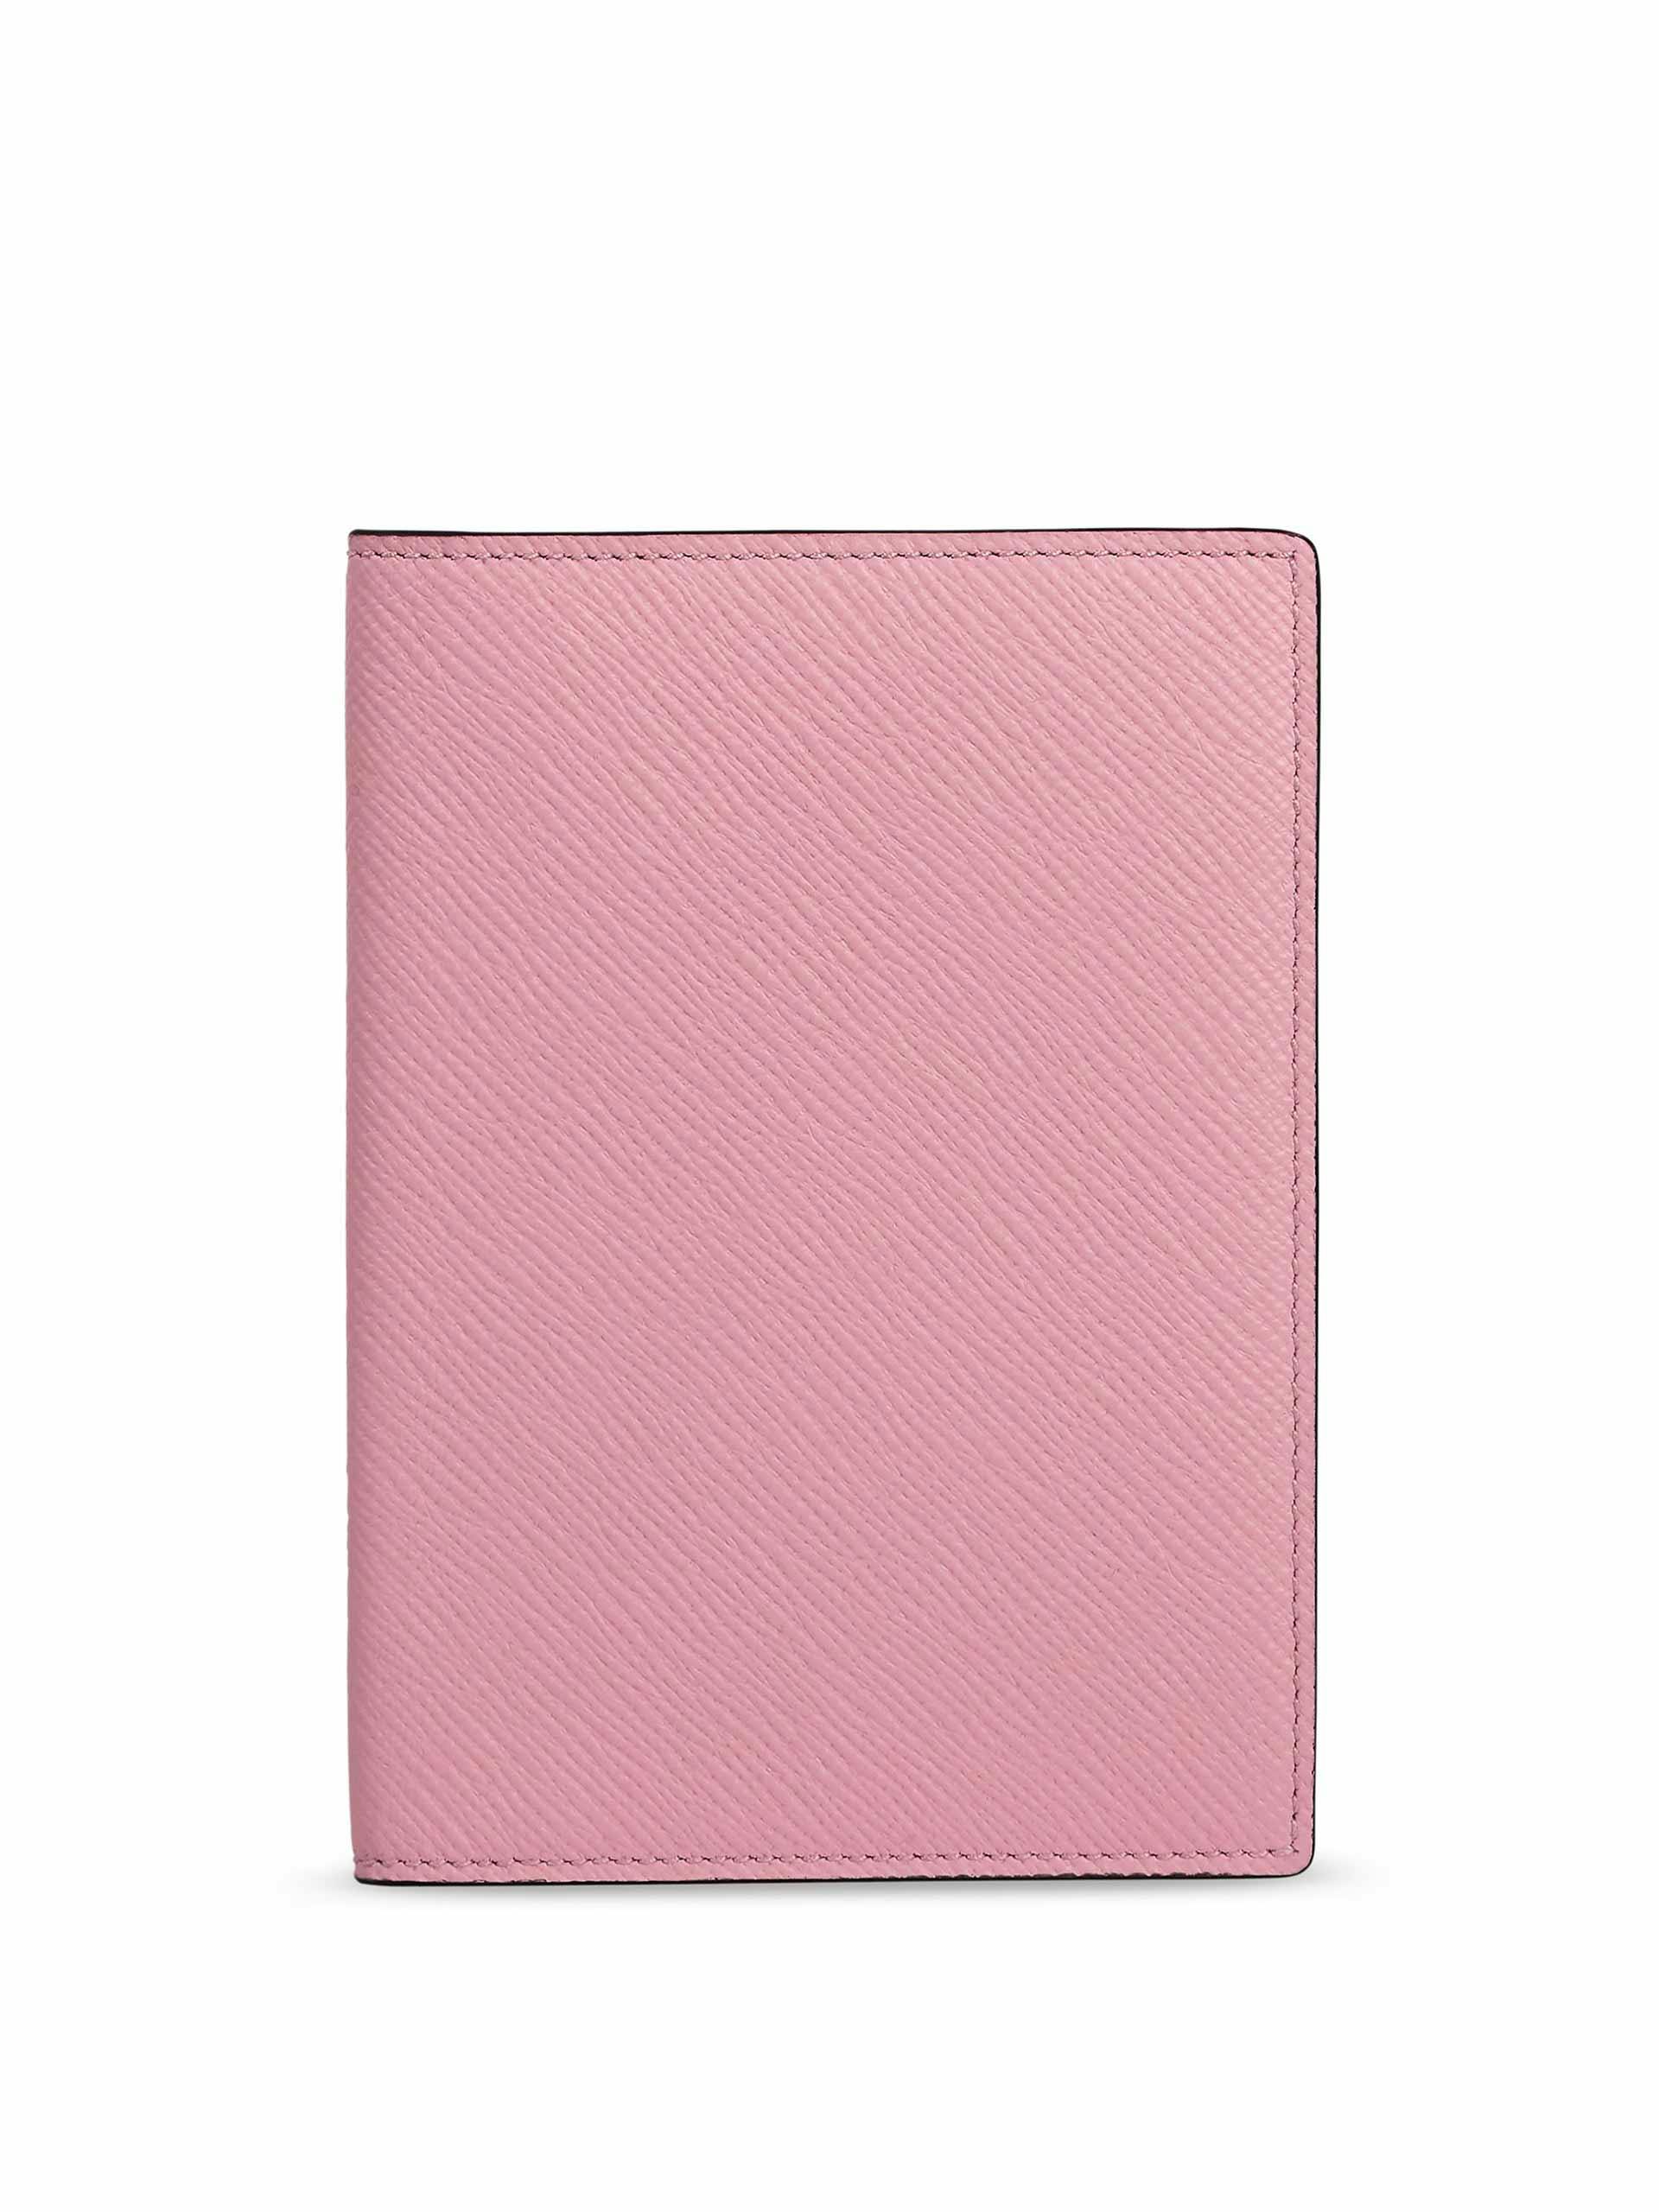 Pink calf leather passport cover